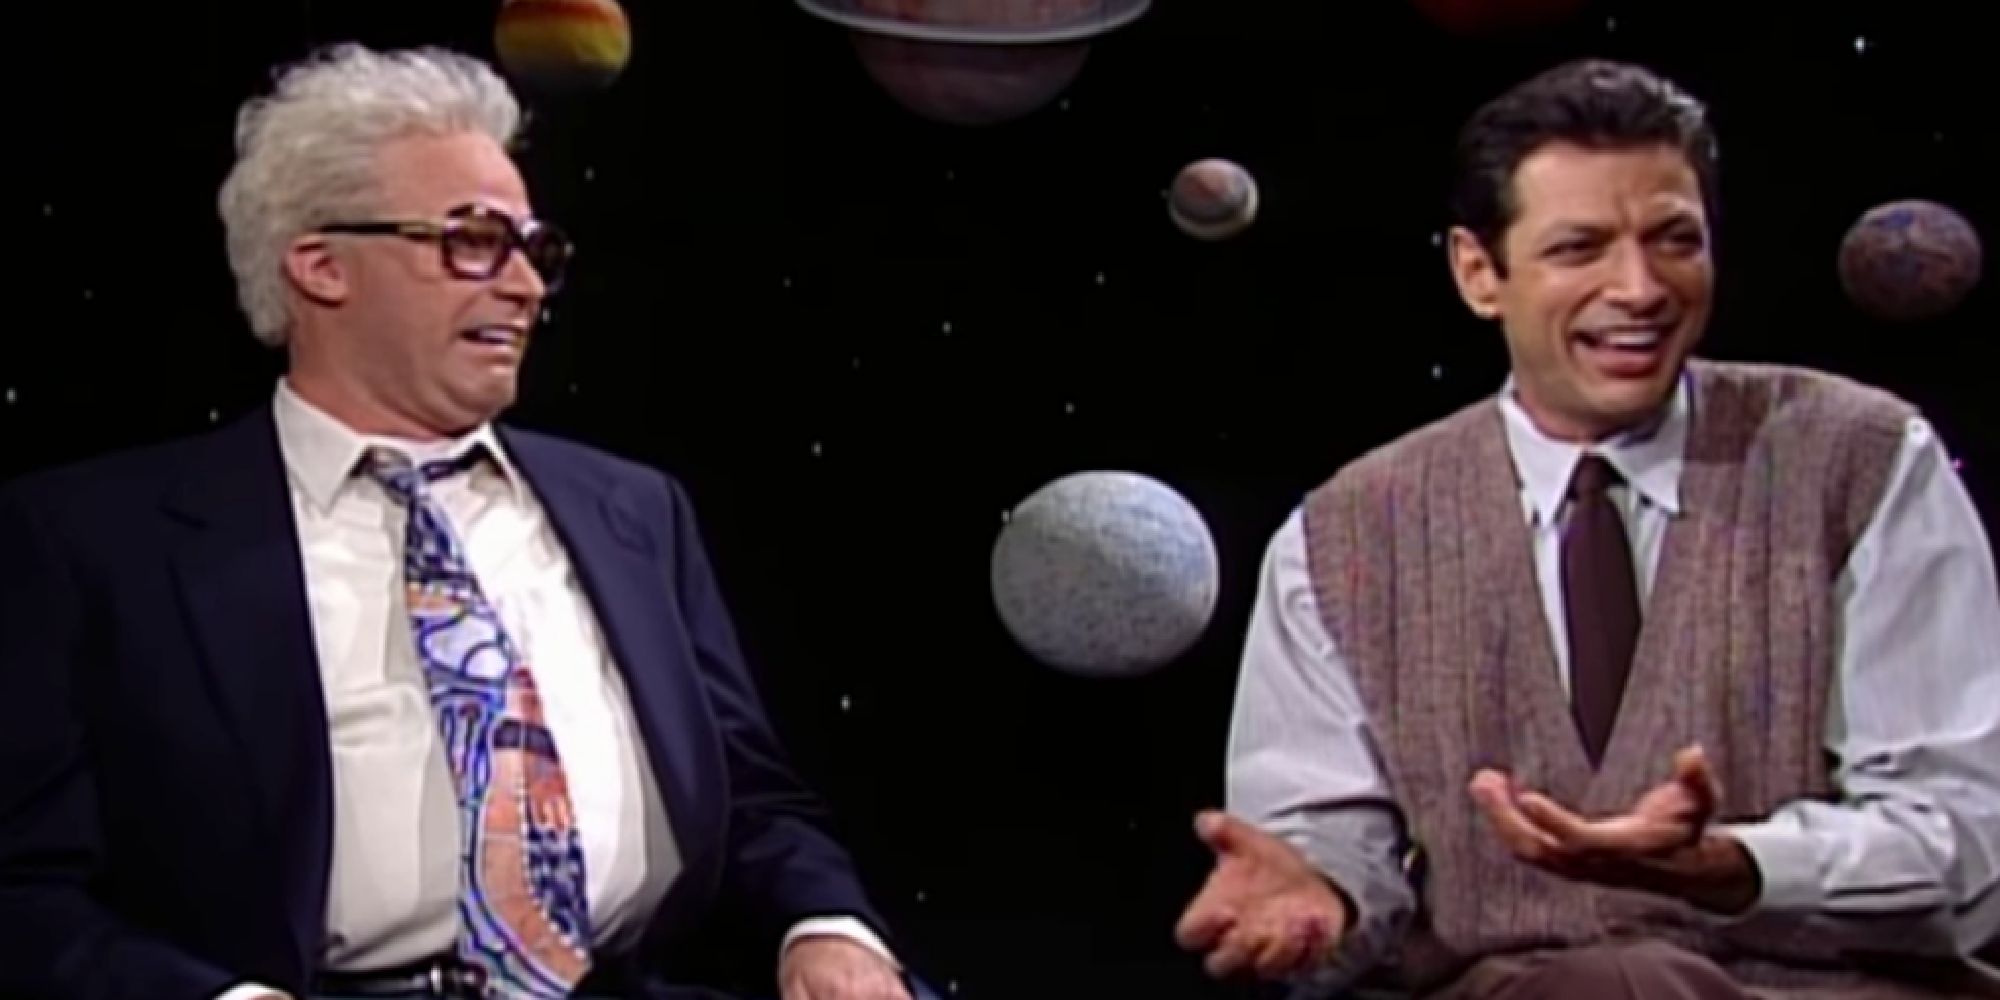 Harry Caray interviewing Jeff Golfblum about outer space